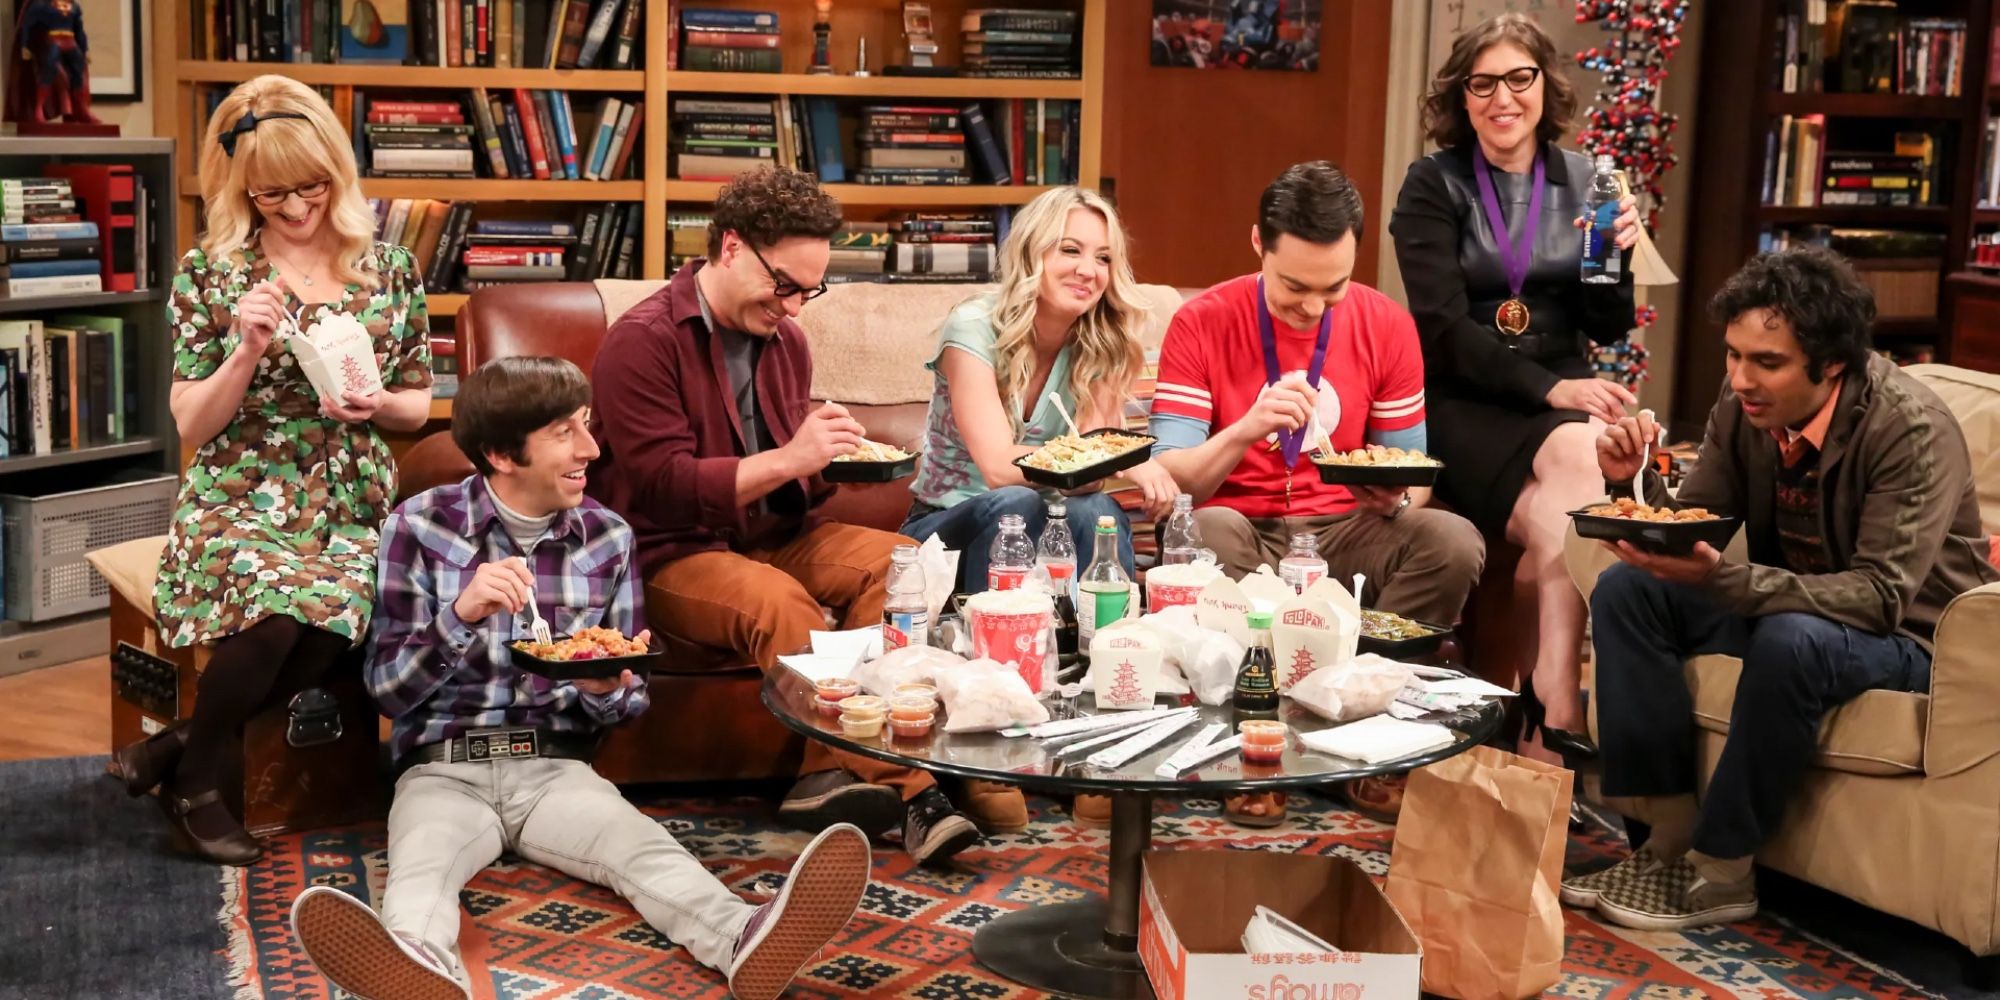 The main cast of The Big Bang Theory eating takeout.